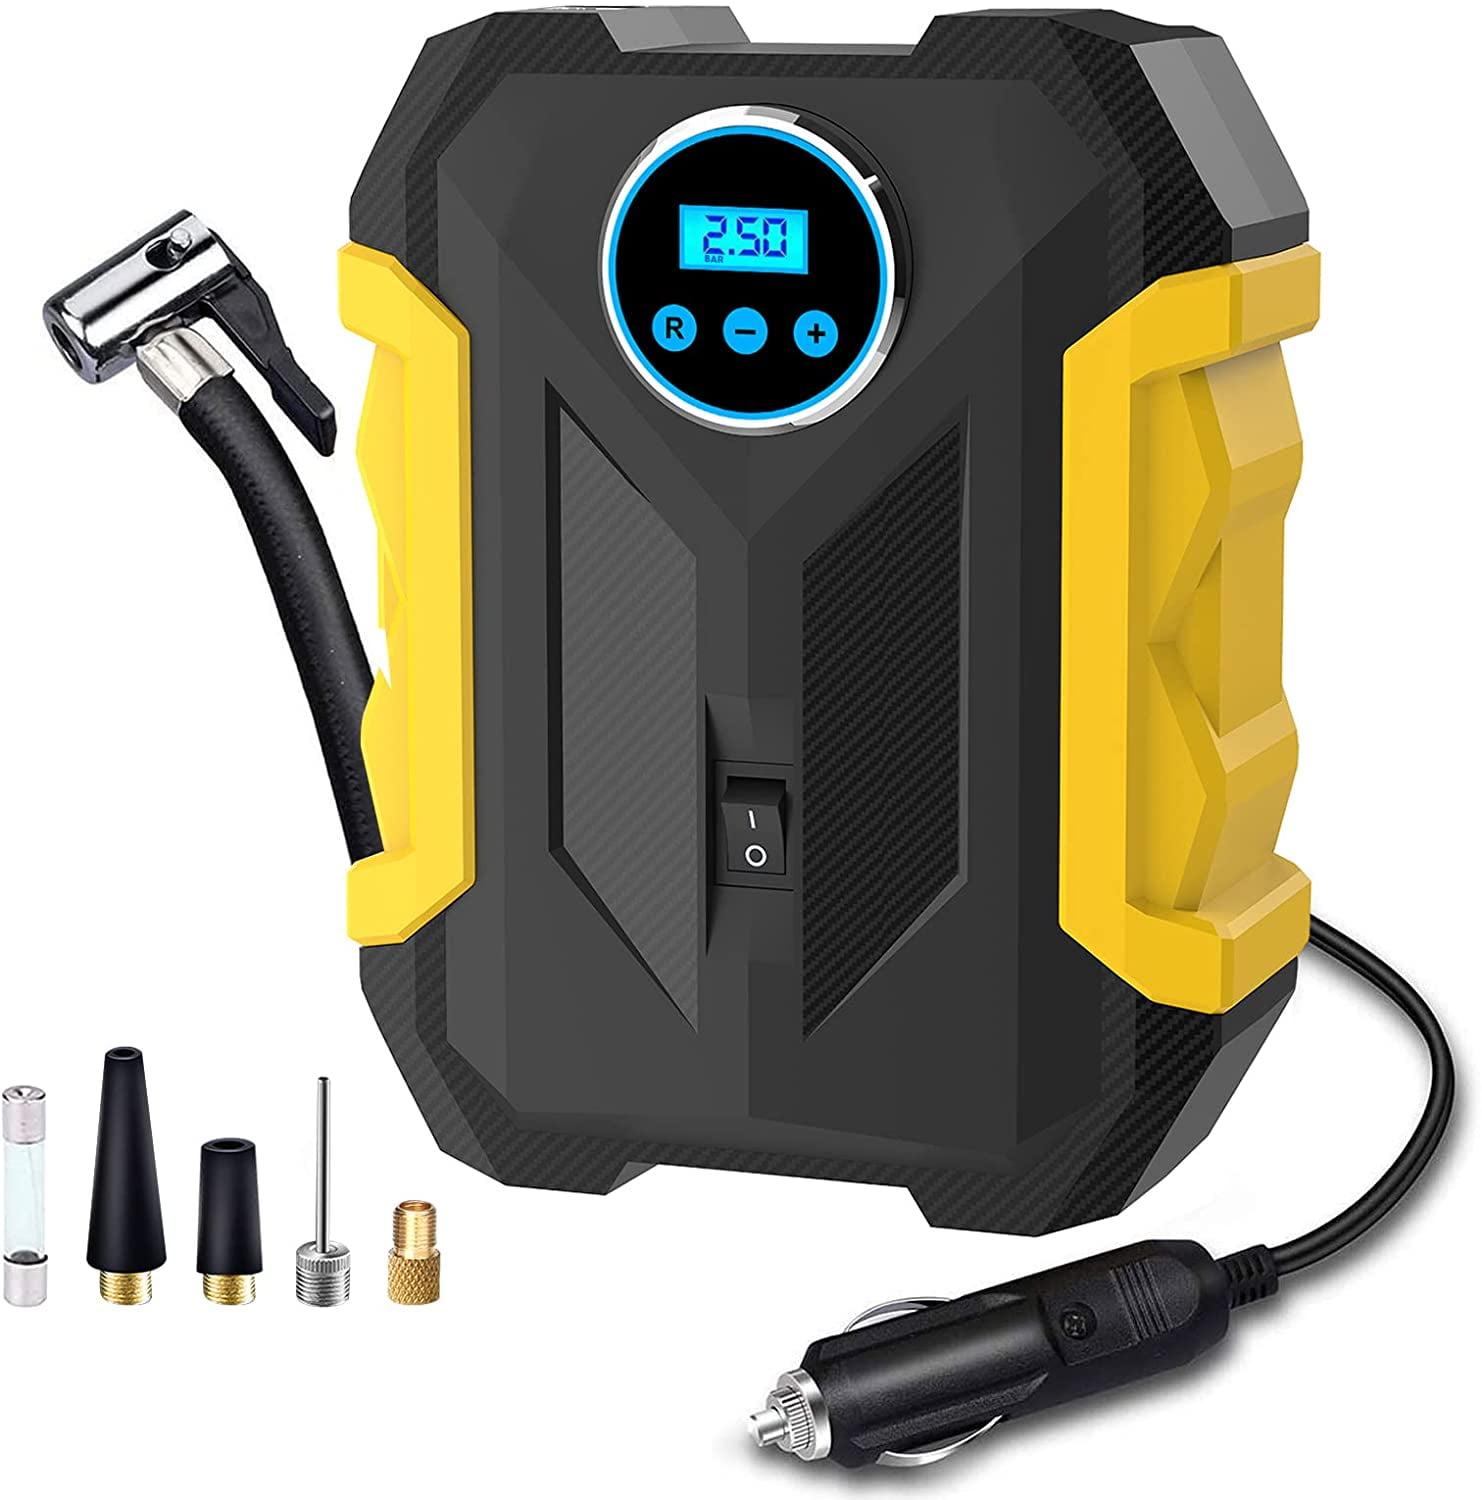 Tire Inflator Pump Wired and rechargeable Car Air Compressor Portable  compressor for Car Battery Cordless Smart Digital Display - AliExpress